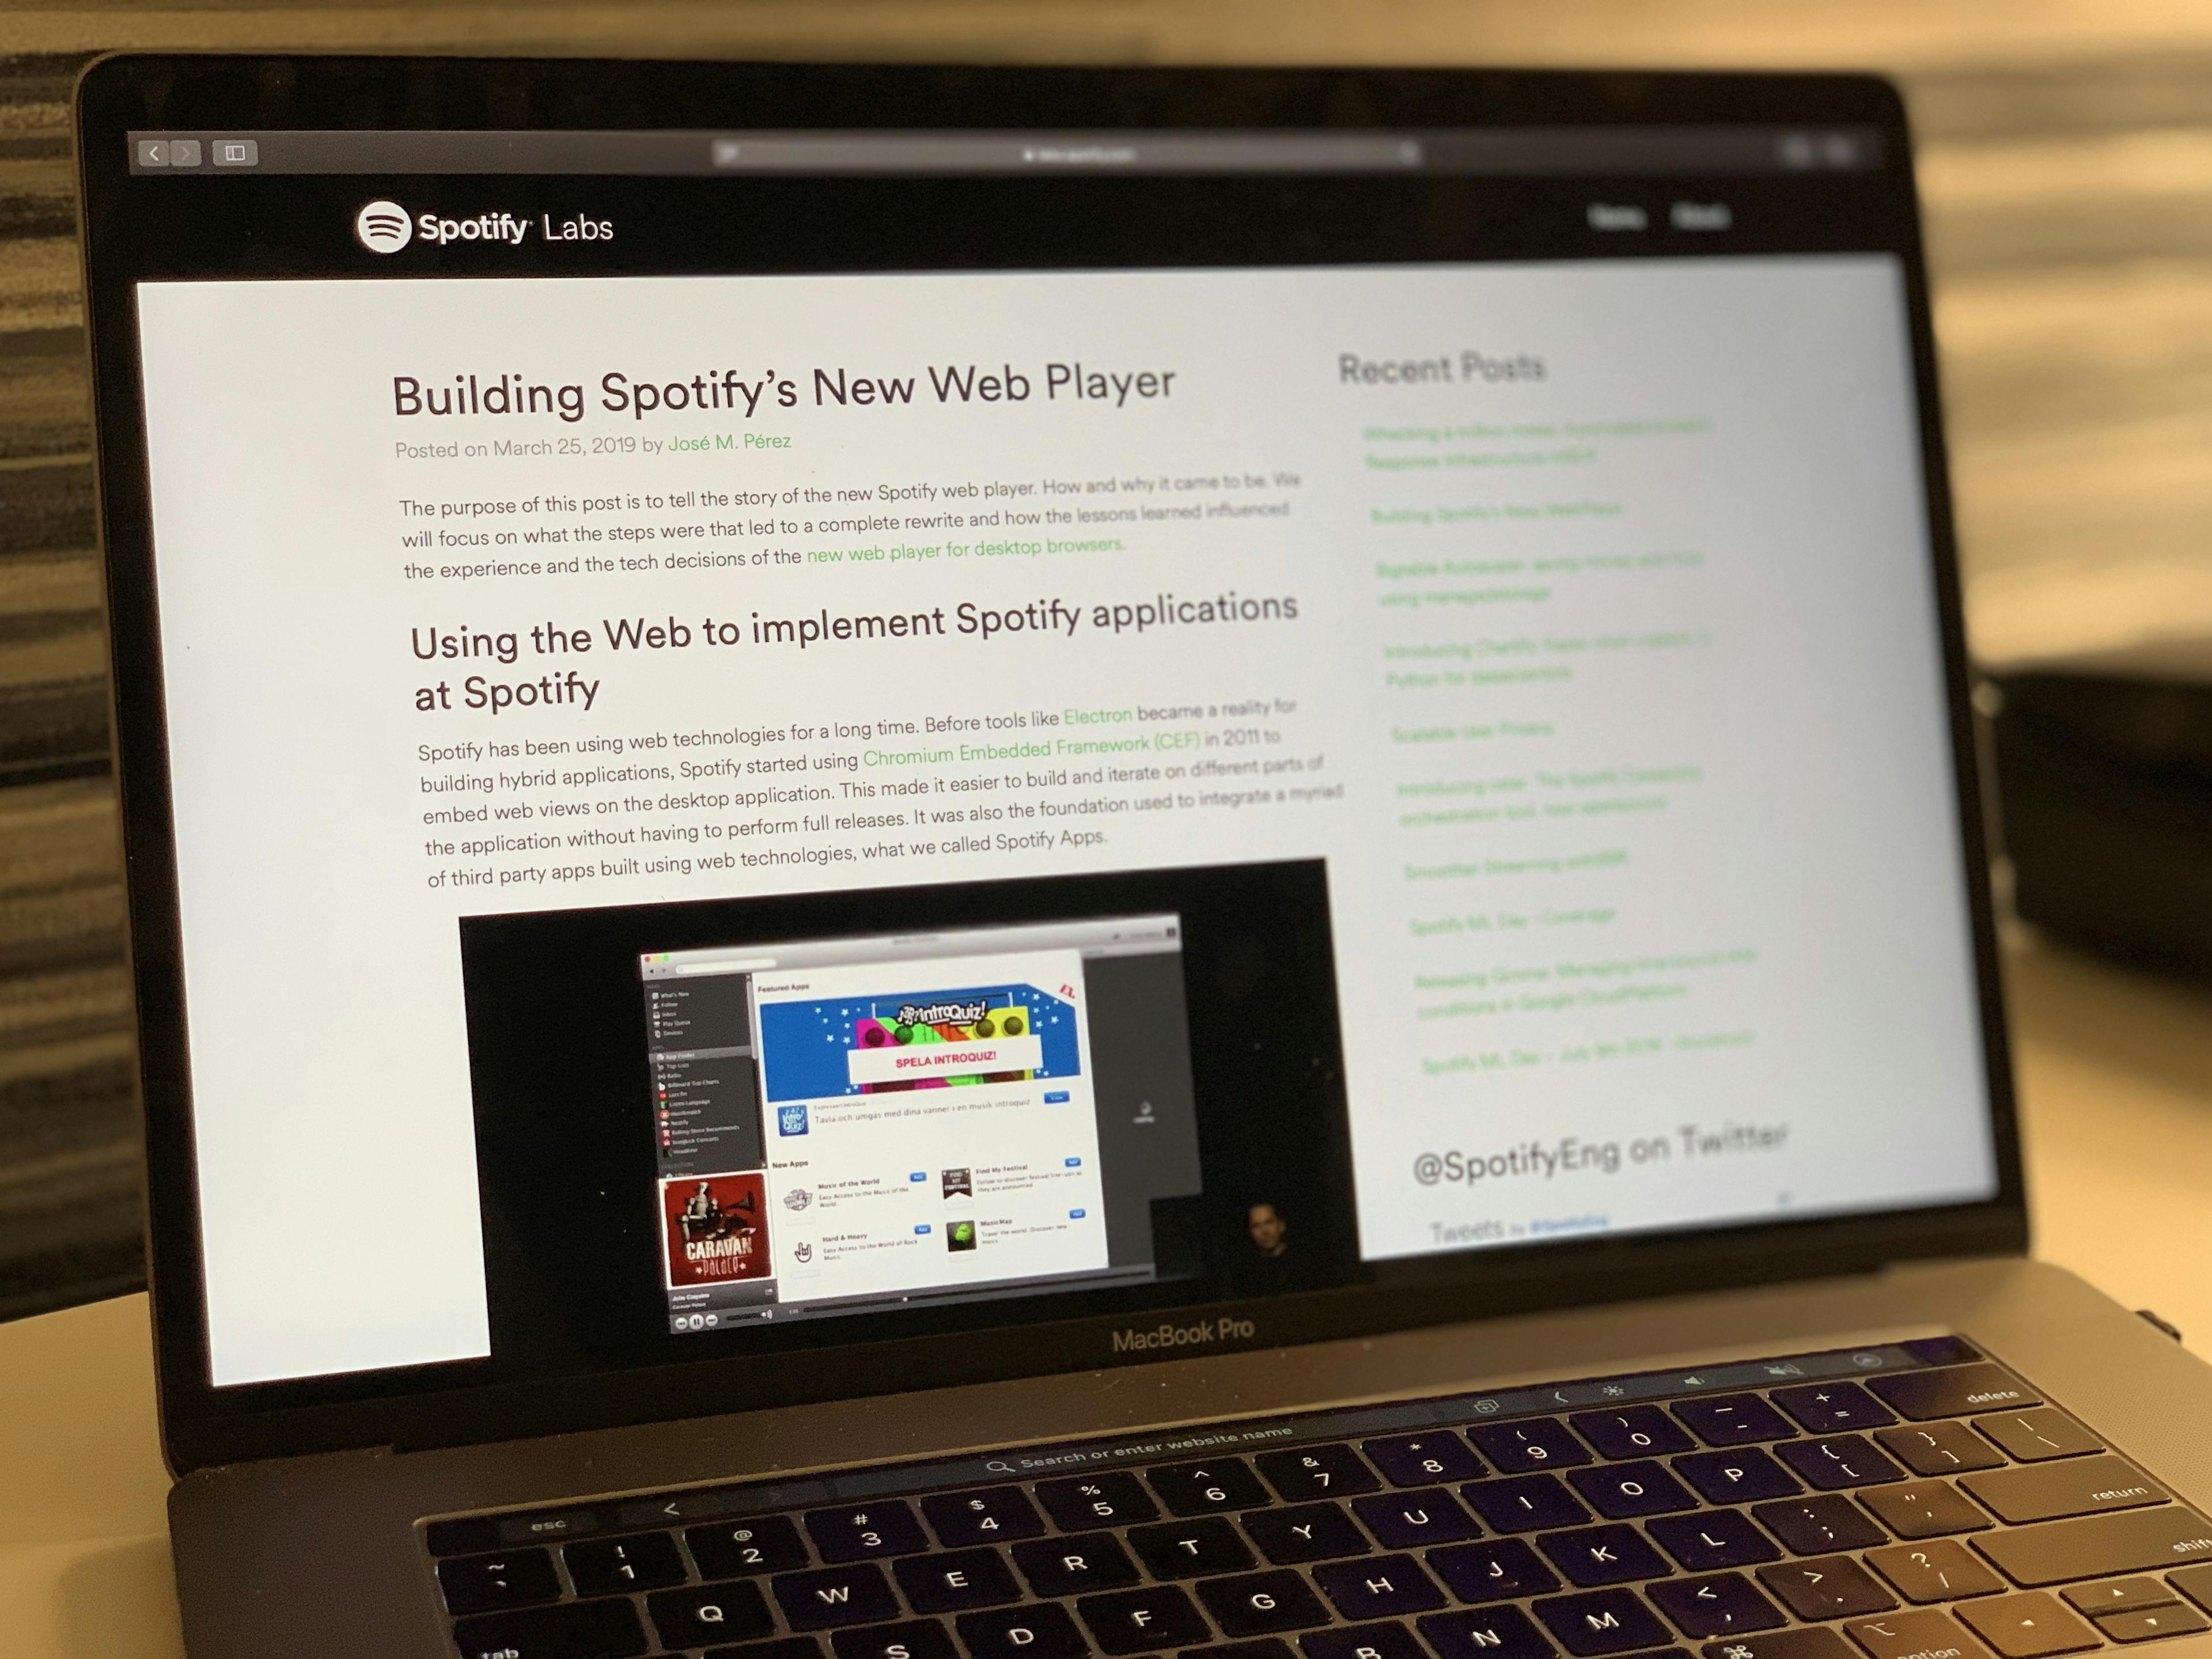 A picture of a laptop showing Spotify's Web Player